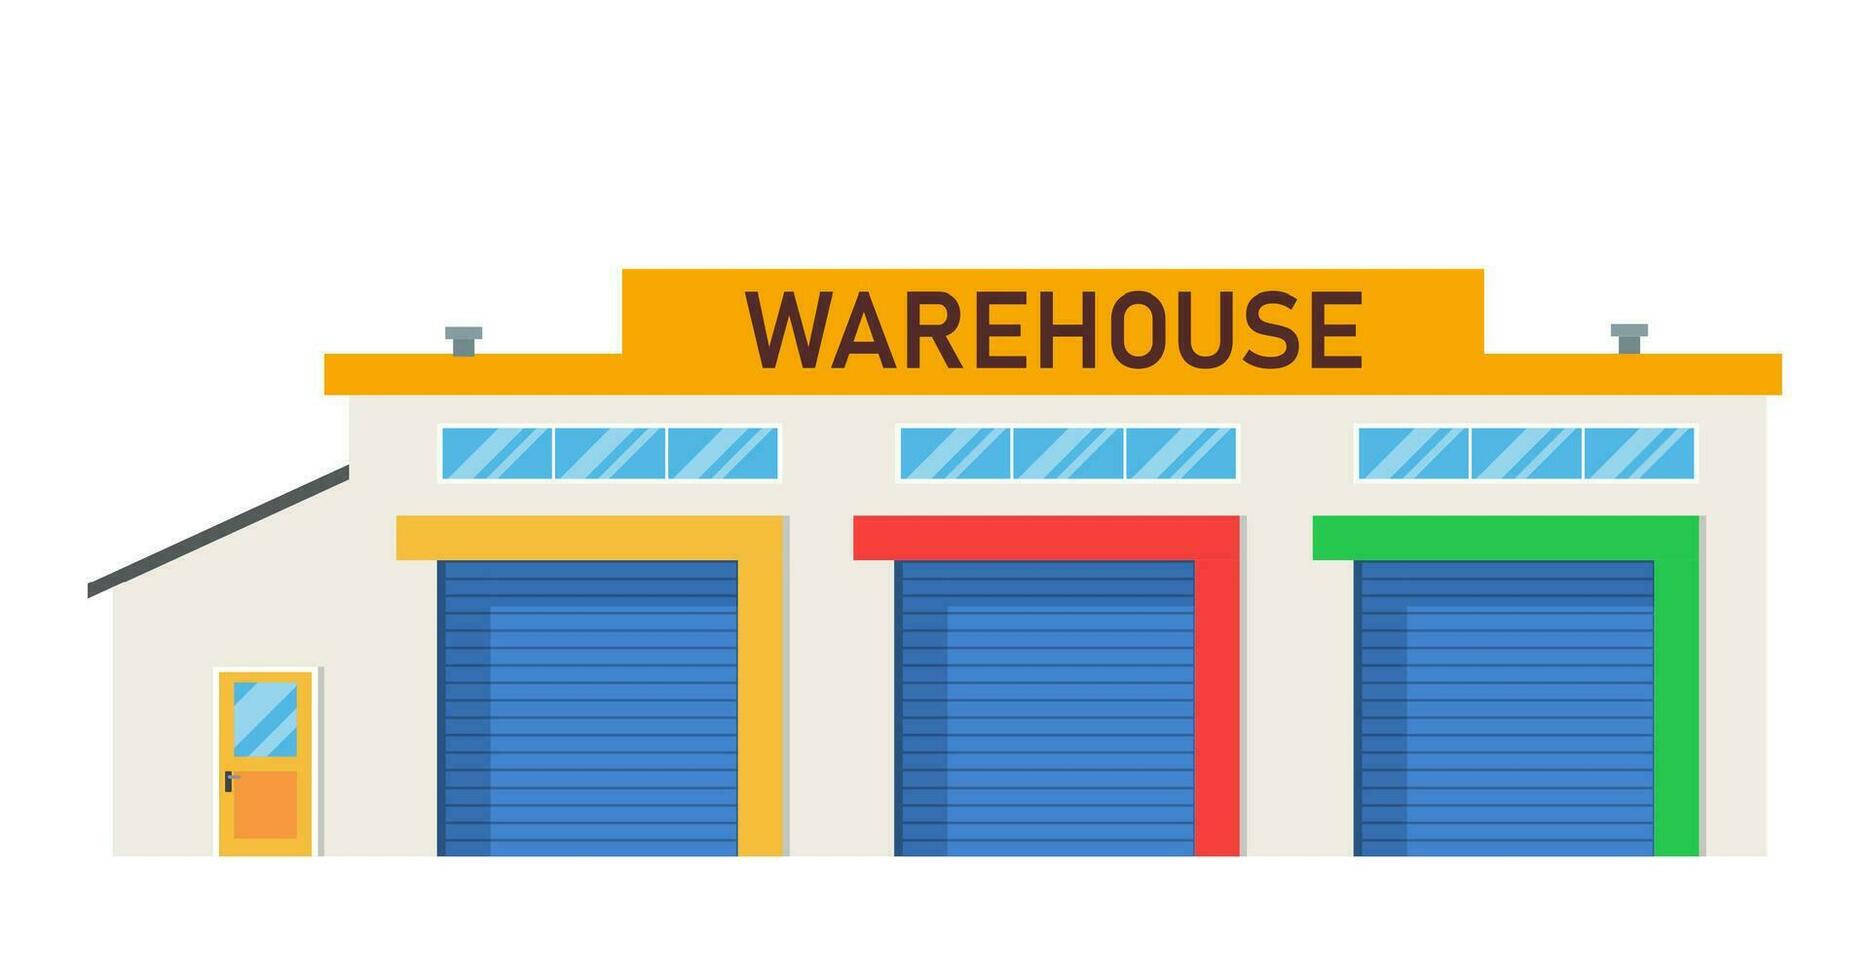 Modern Warehouse Building loading docks. Storage center logistics.Isolated object white background. Vector illustration in flat style